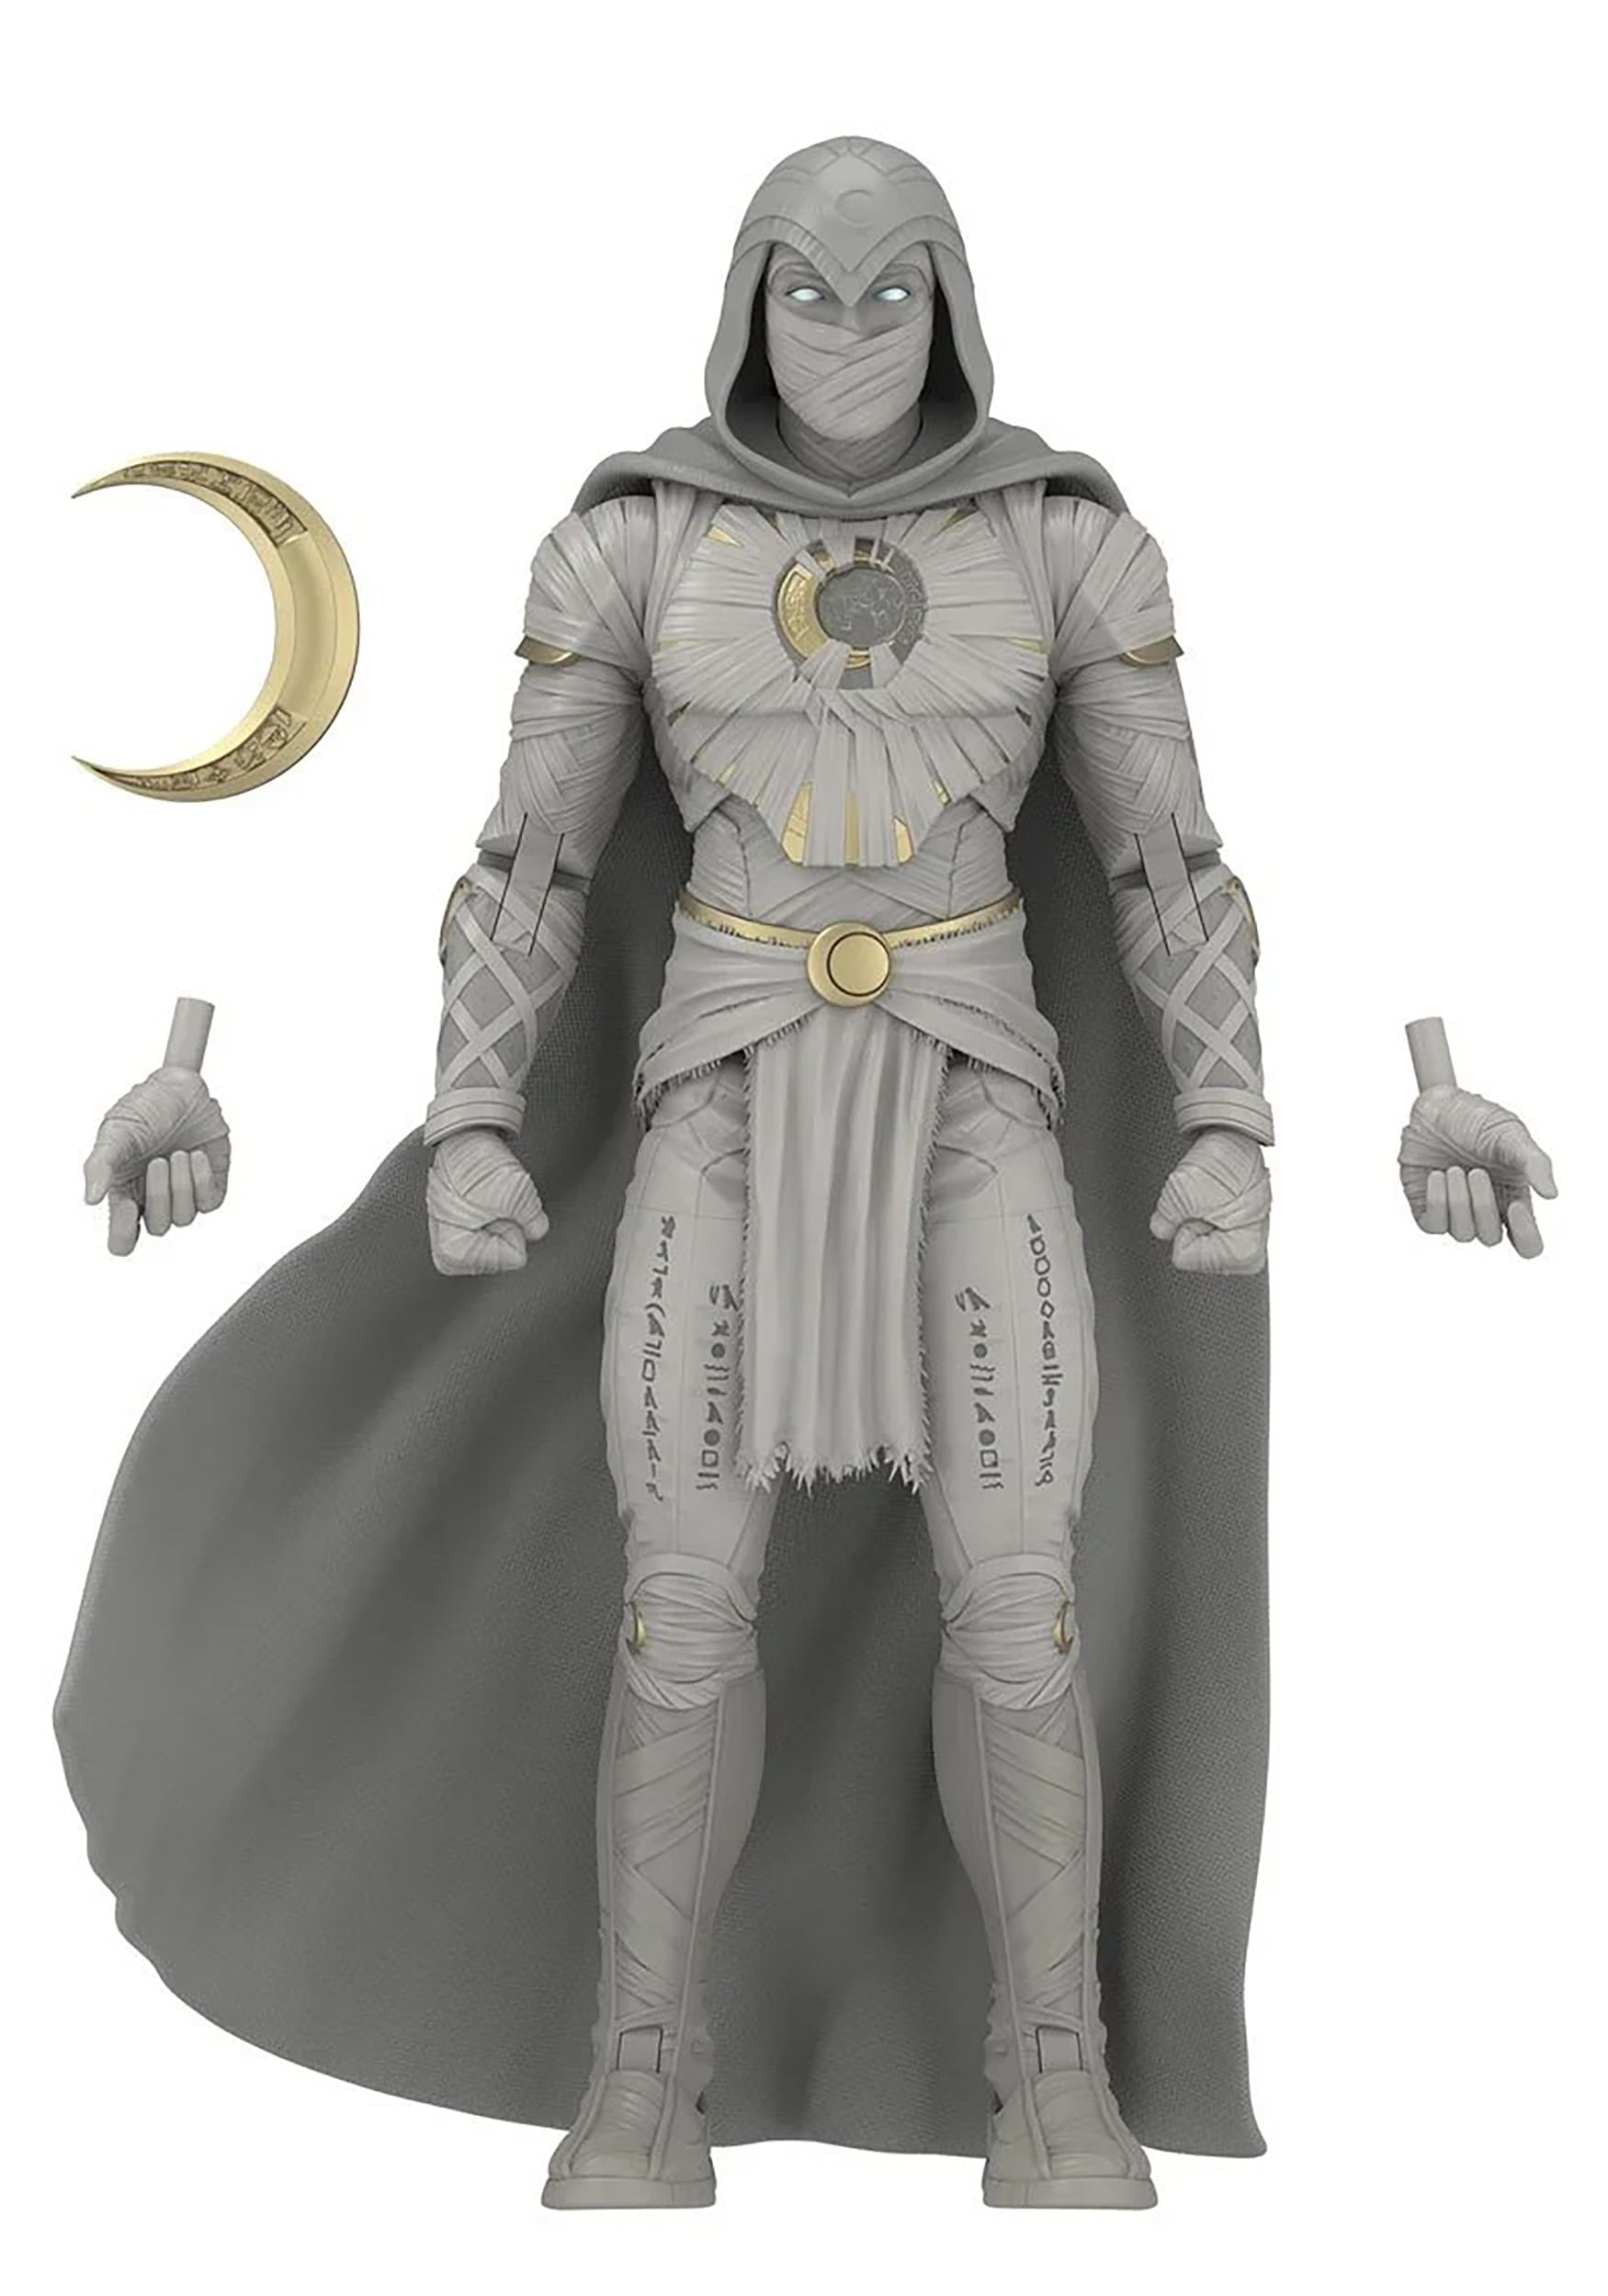 Marvel Legends Series Disney Plus Moon Knight Collectible Action Figure